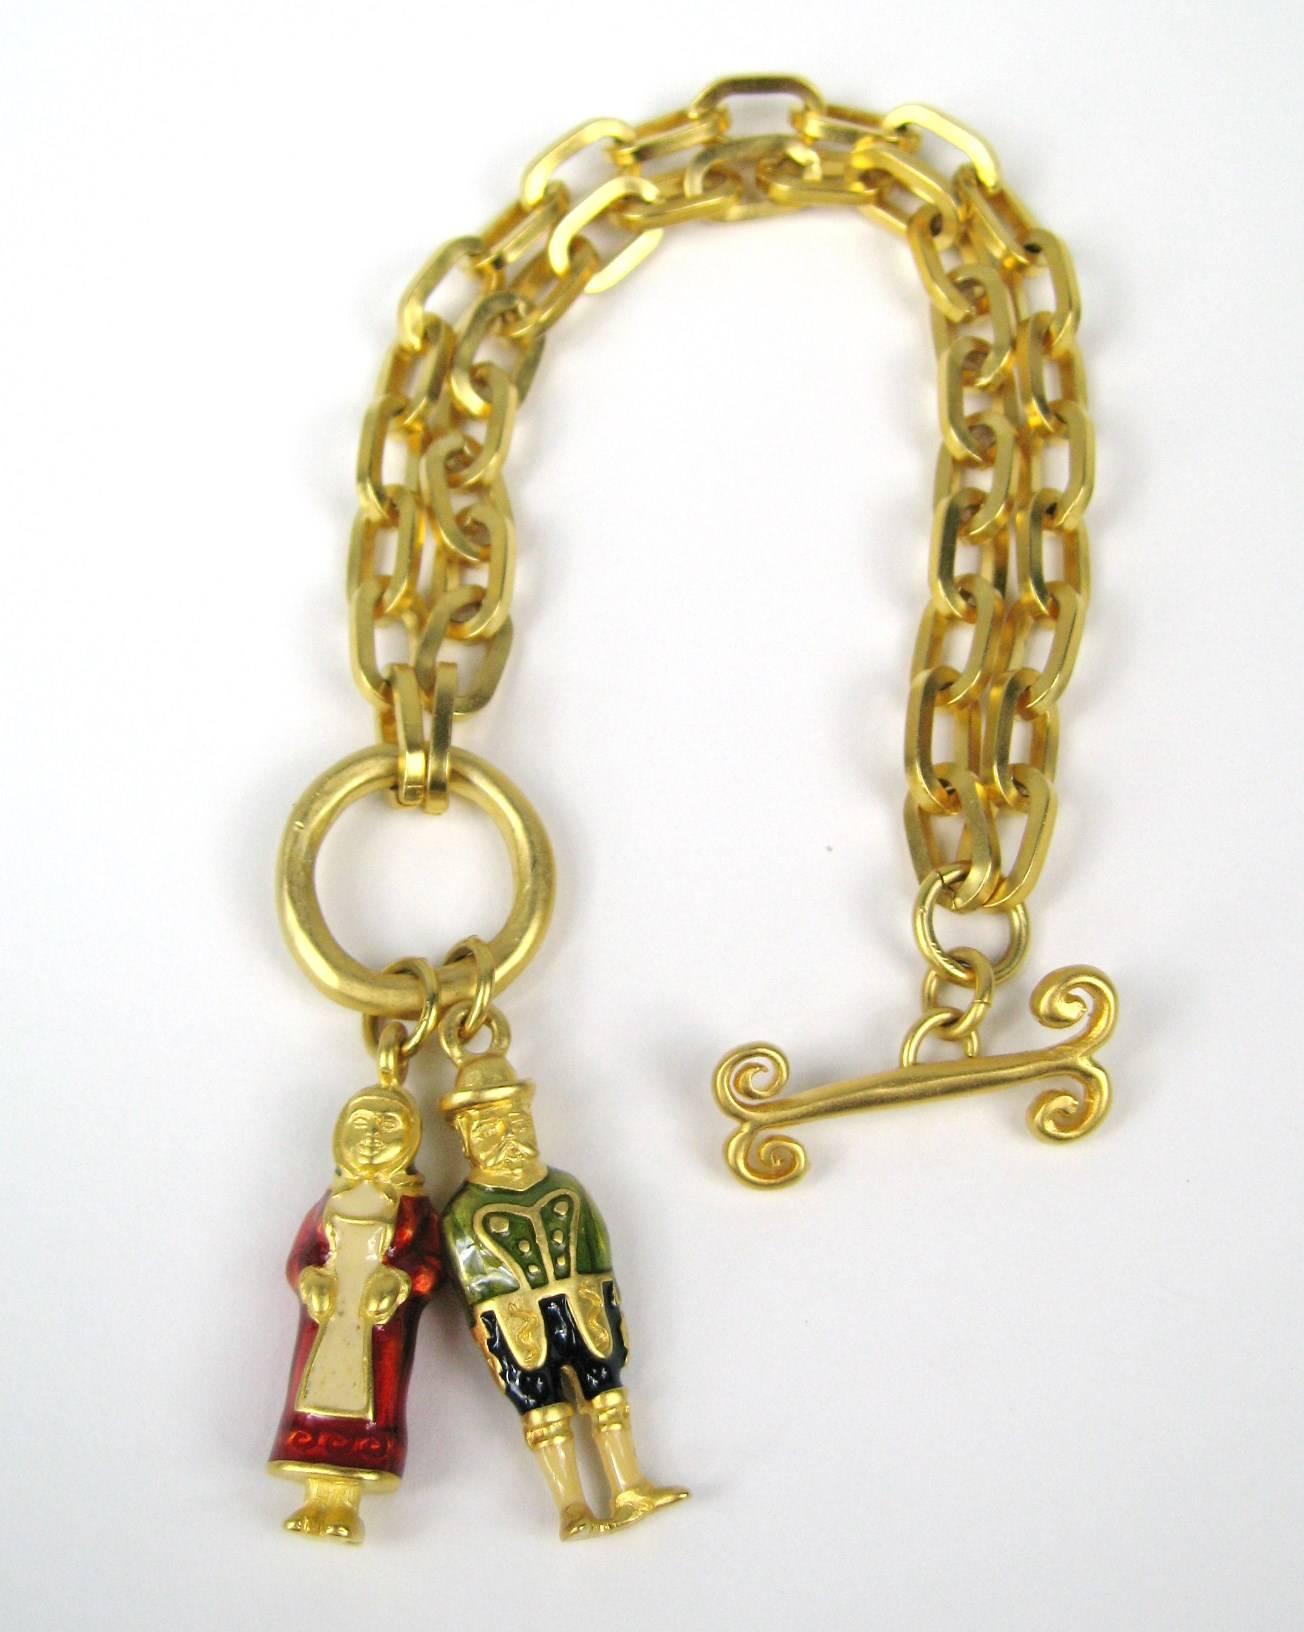 Karl Lagerfeld Bracelet Chain Link Gold Gilt Enameled- 1990s  In New Condition For Sale In Wallkill, NY